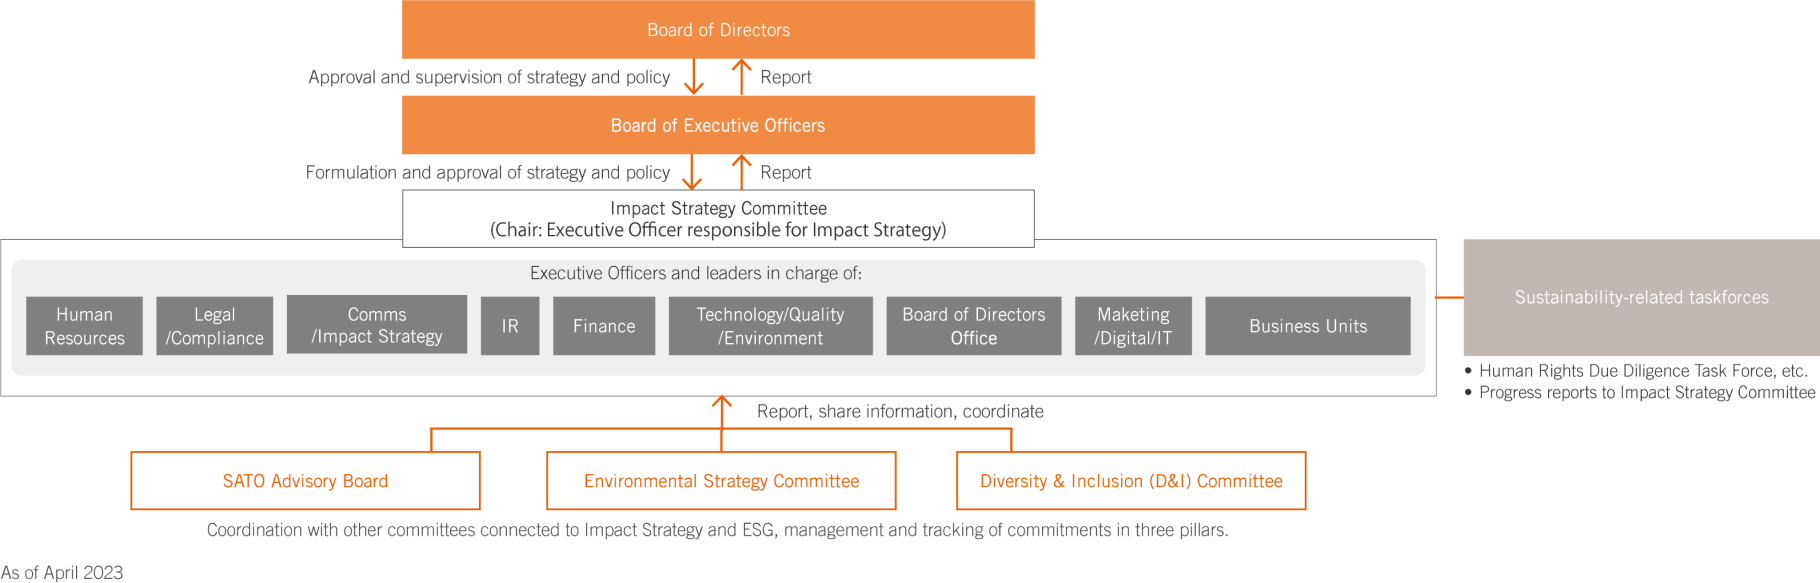 CR Governance Structure